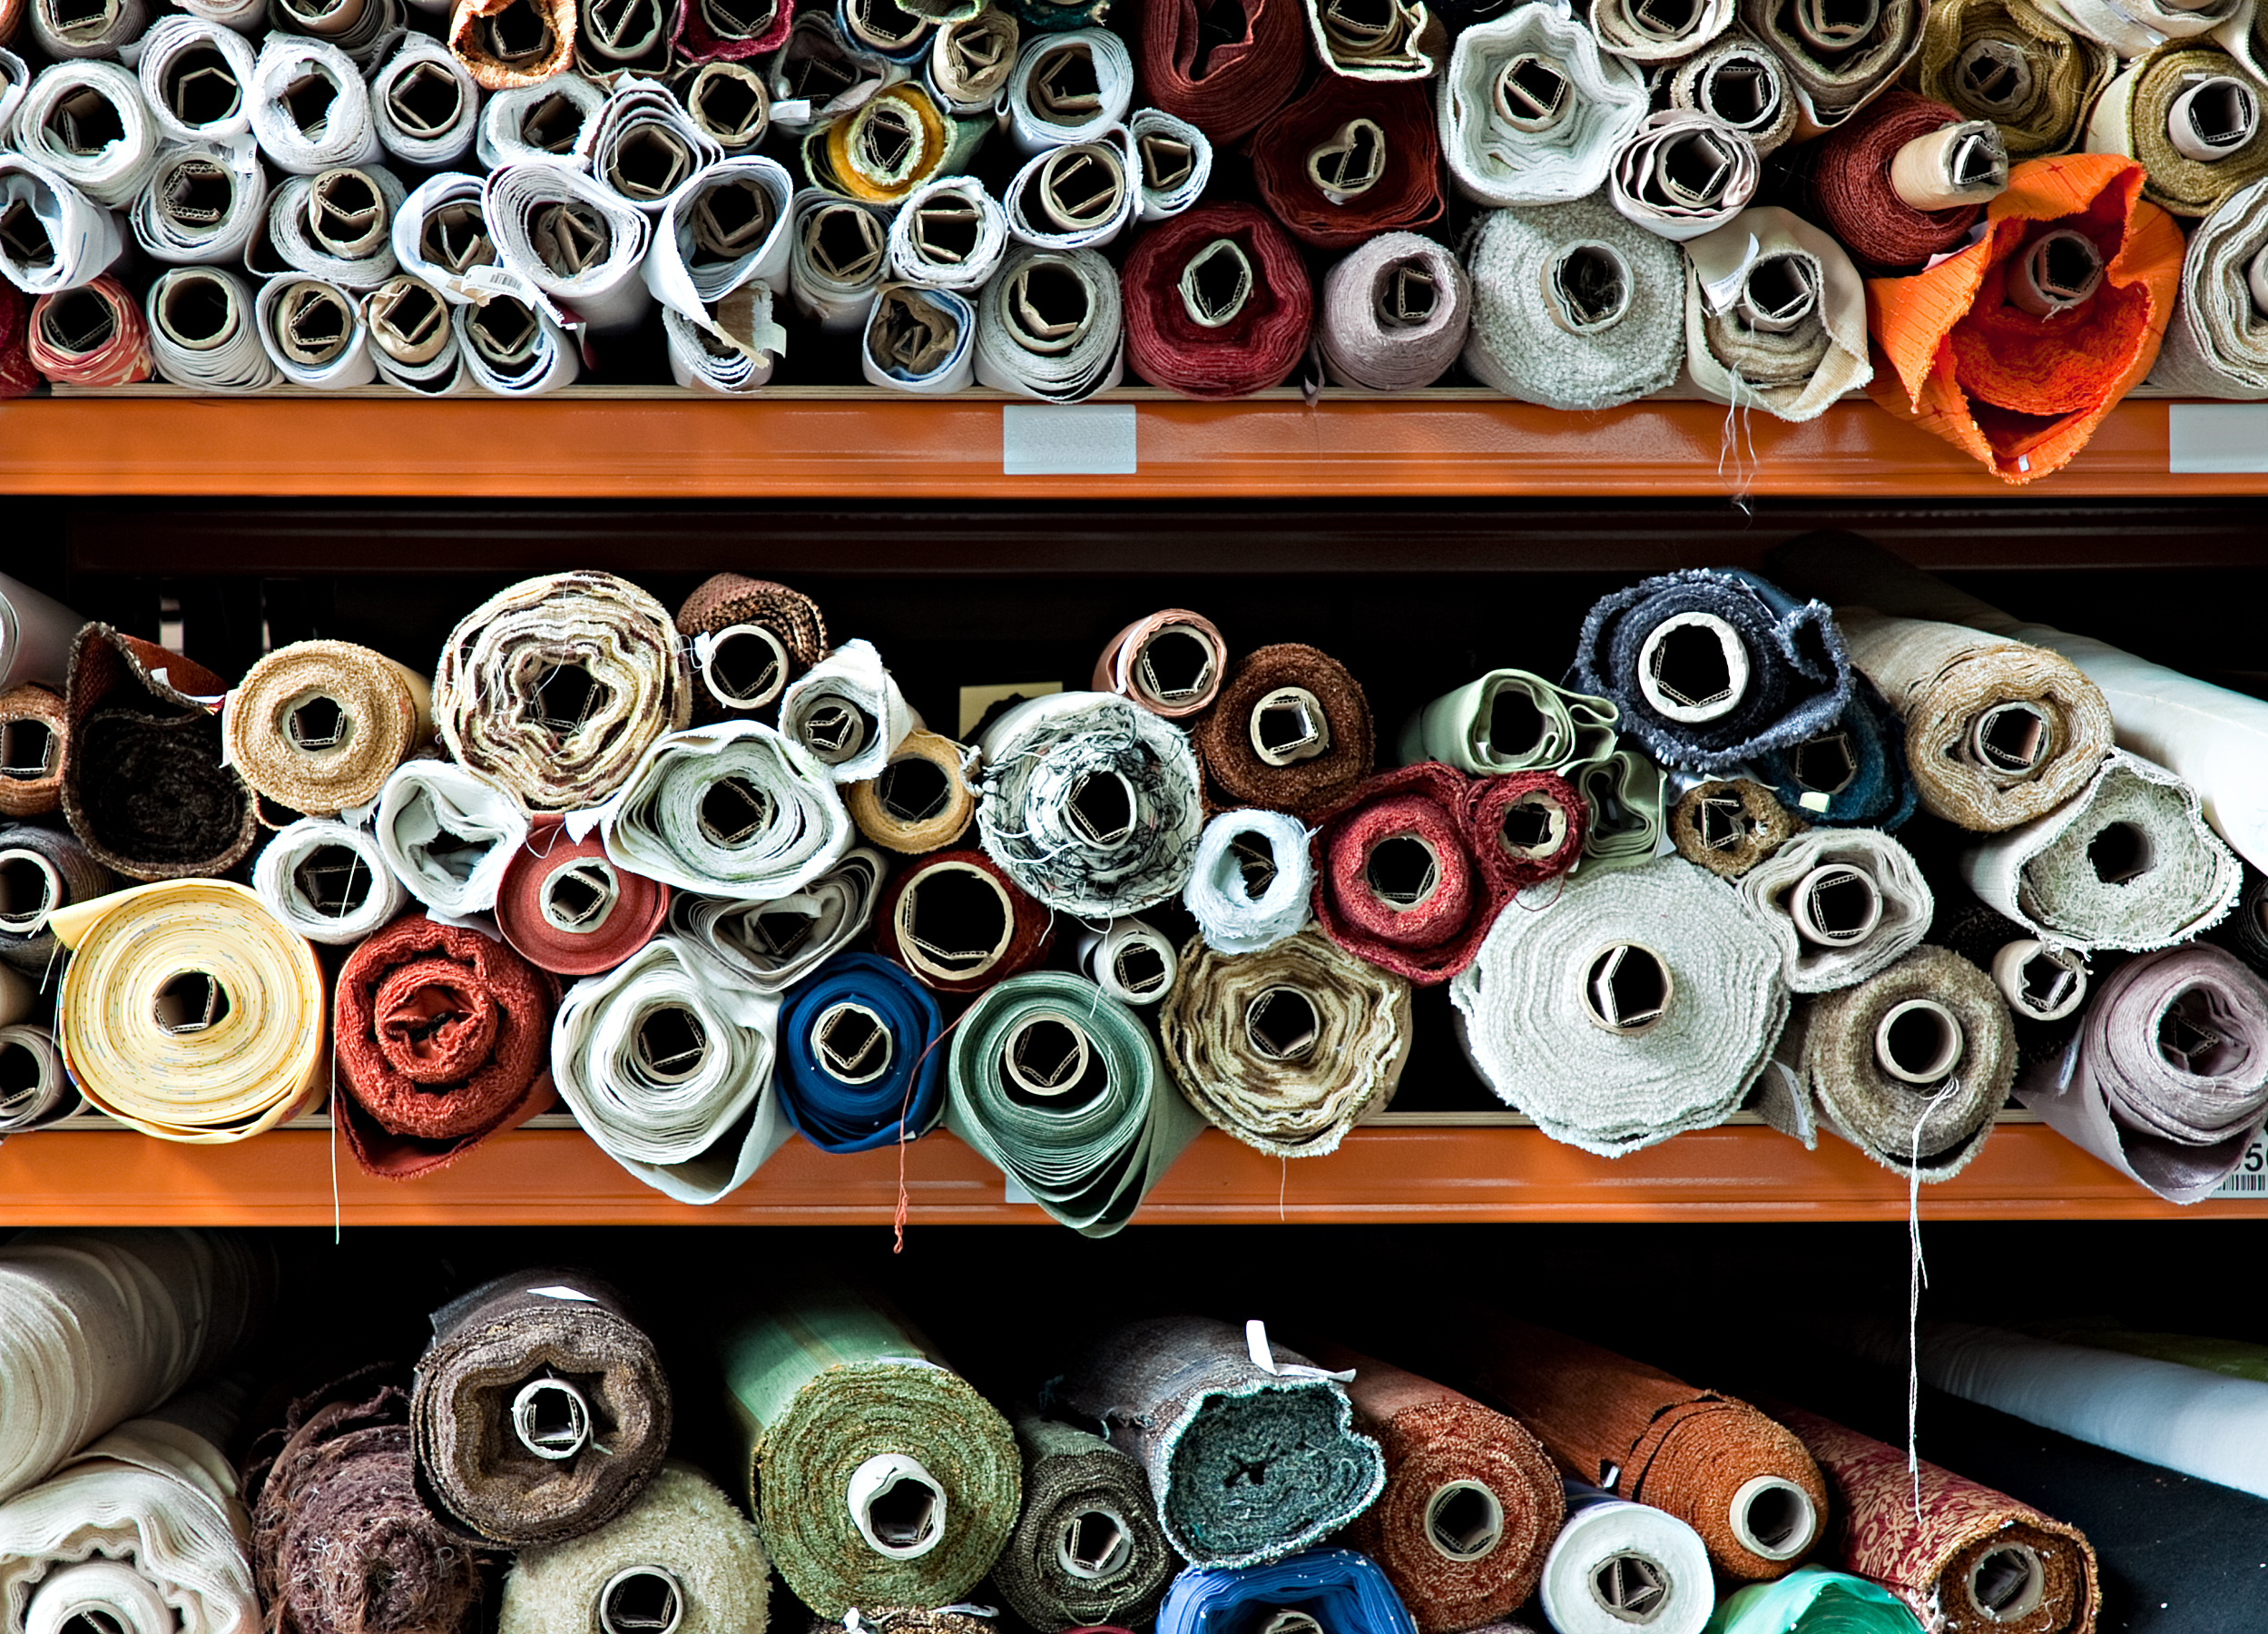 A large cabinet is seen with three shelves stacked full of different coloured rolls of textile materials.